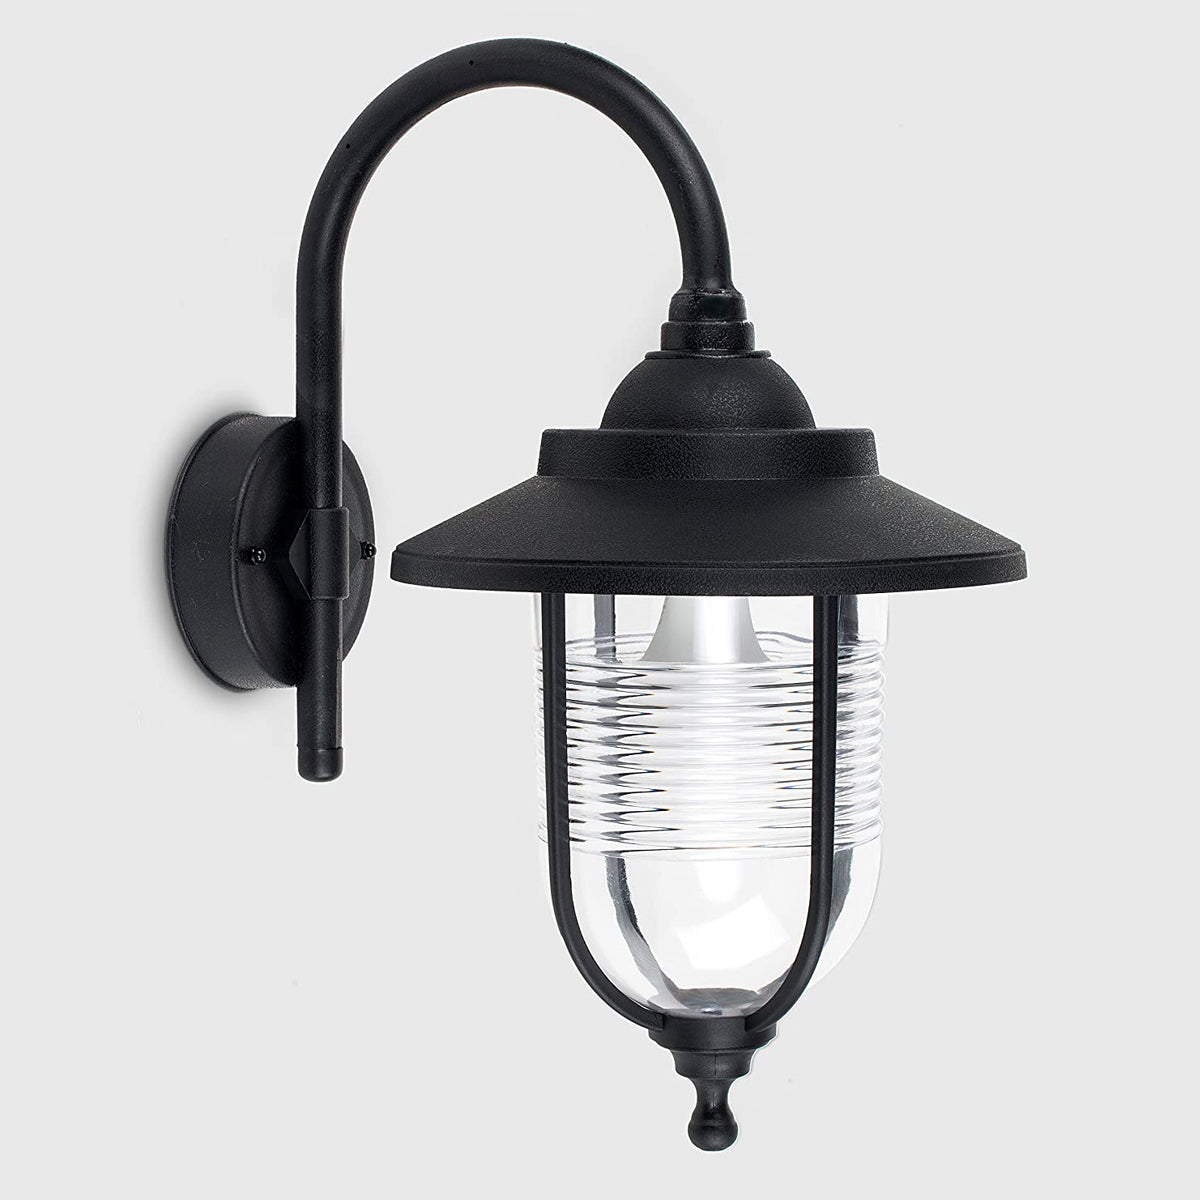 The Evelyn black fisherman hooked outdoor wall lantern light is constructed of a black weatherproof metal and features an attractive design inspired by traditional lighting styles. This lantern wall light is a great choice for illuminating doorways, porches wall or patios, creating a warm and inviting look and a safe environment. With an IP44 safety rating, the Evelyn wall light is suitable for mounting on outdoor walls. 